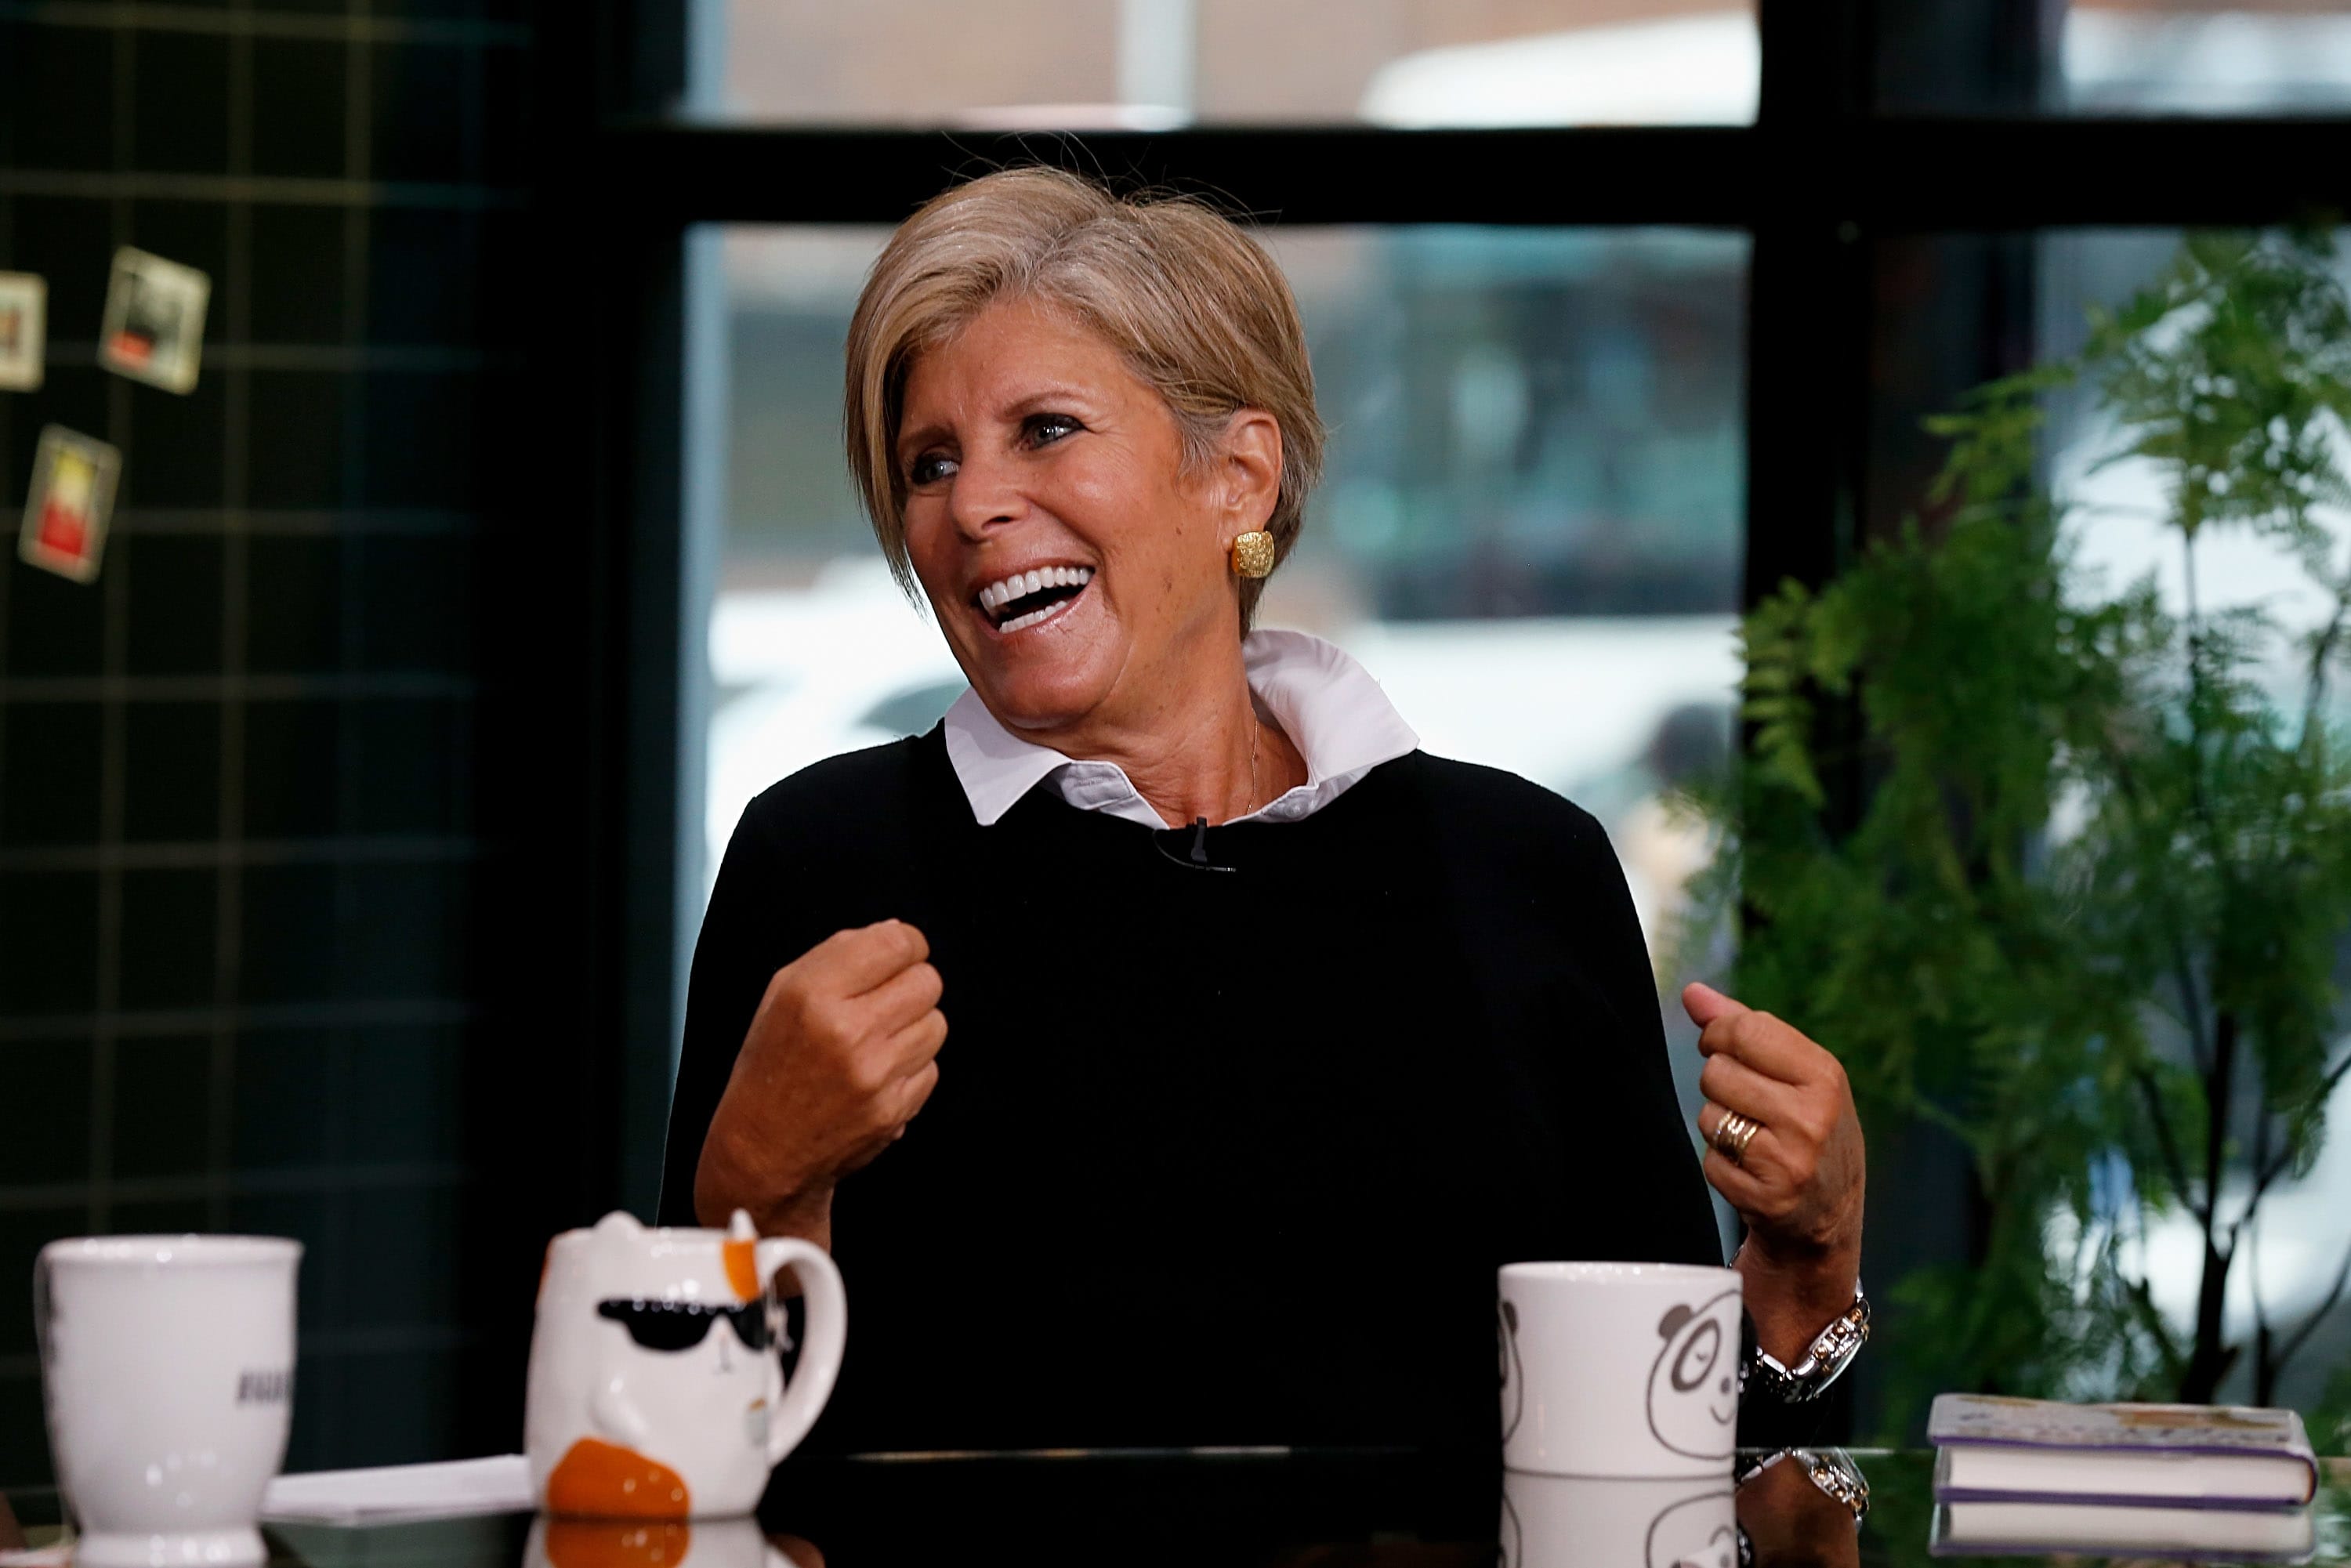 As Suze Orman says to spend your third payment